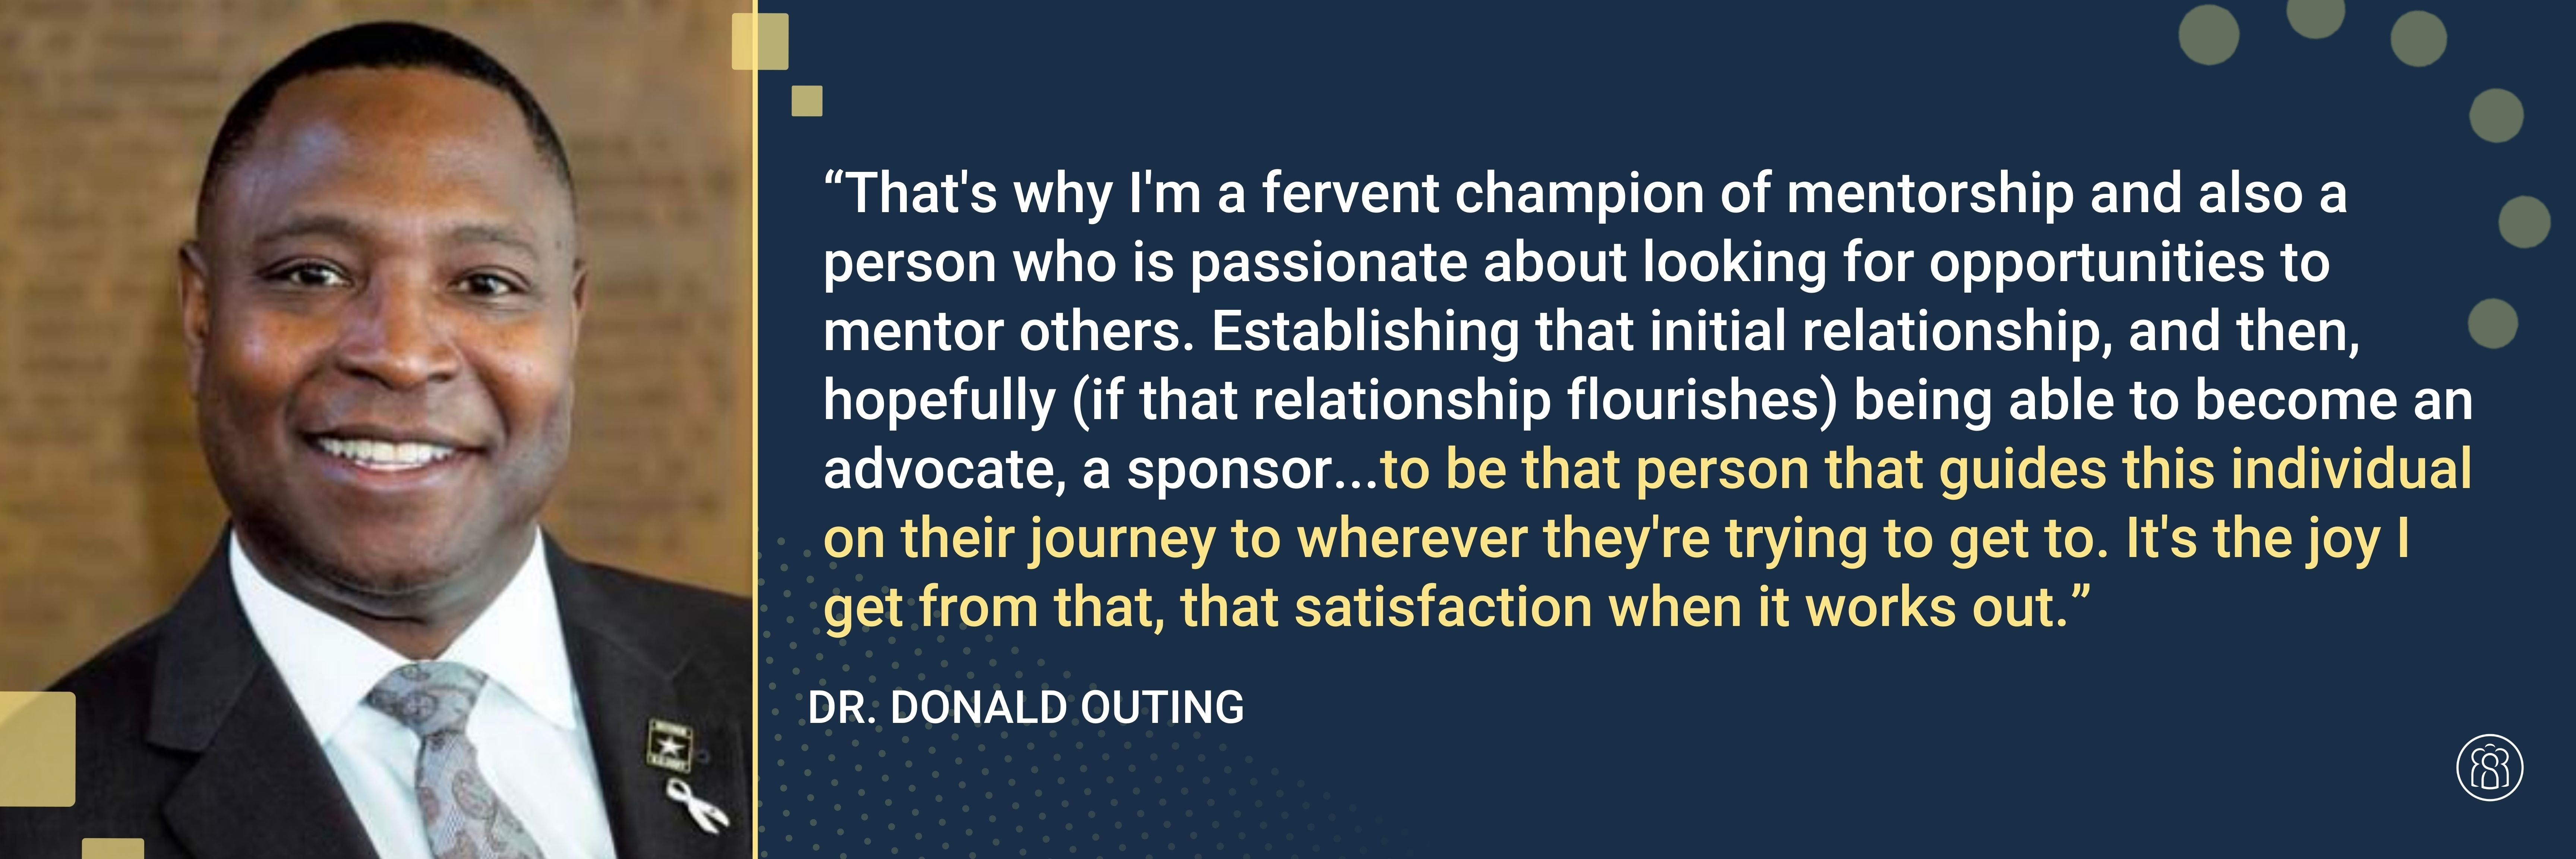 Donald Outing_Champion